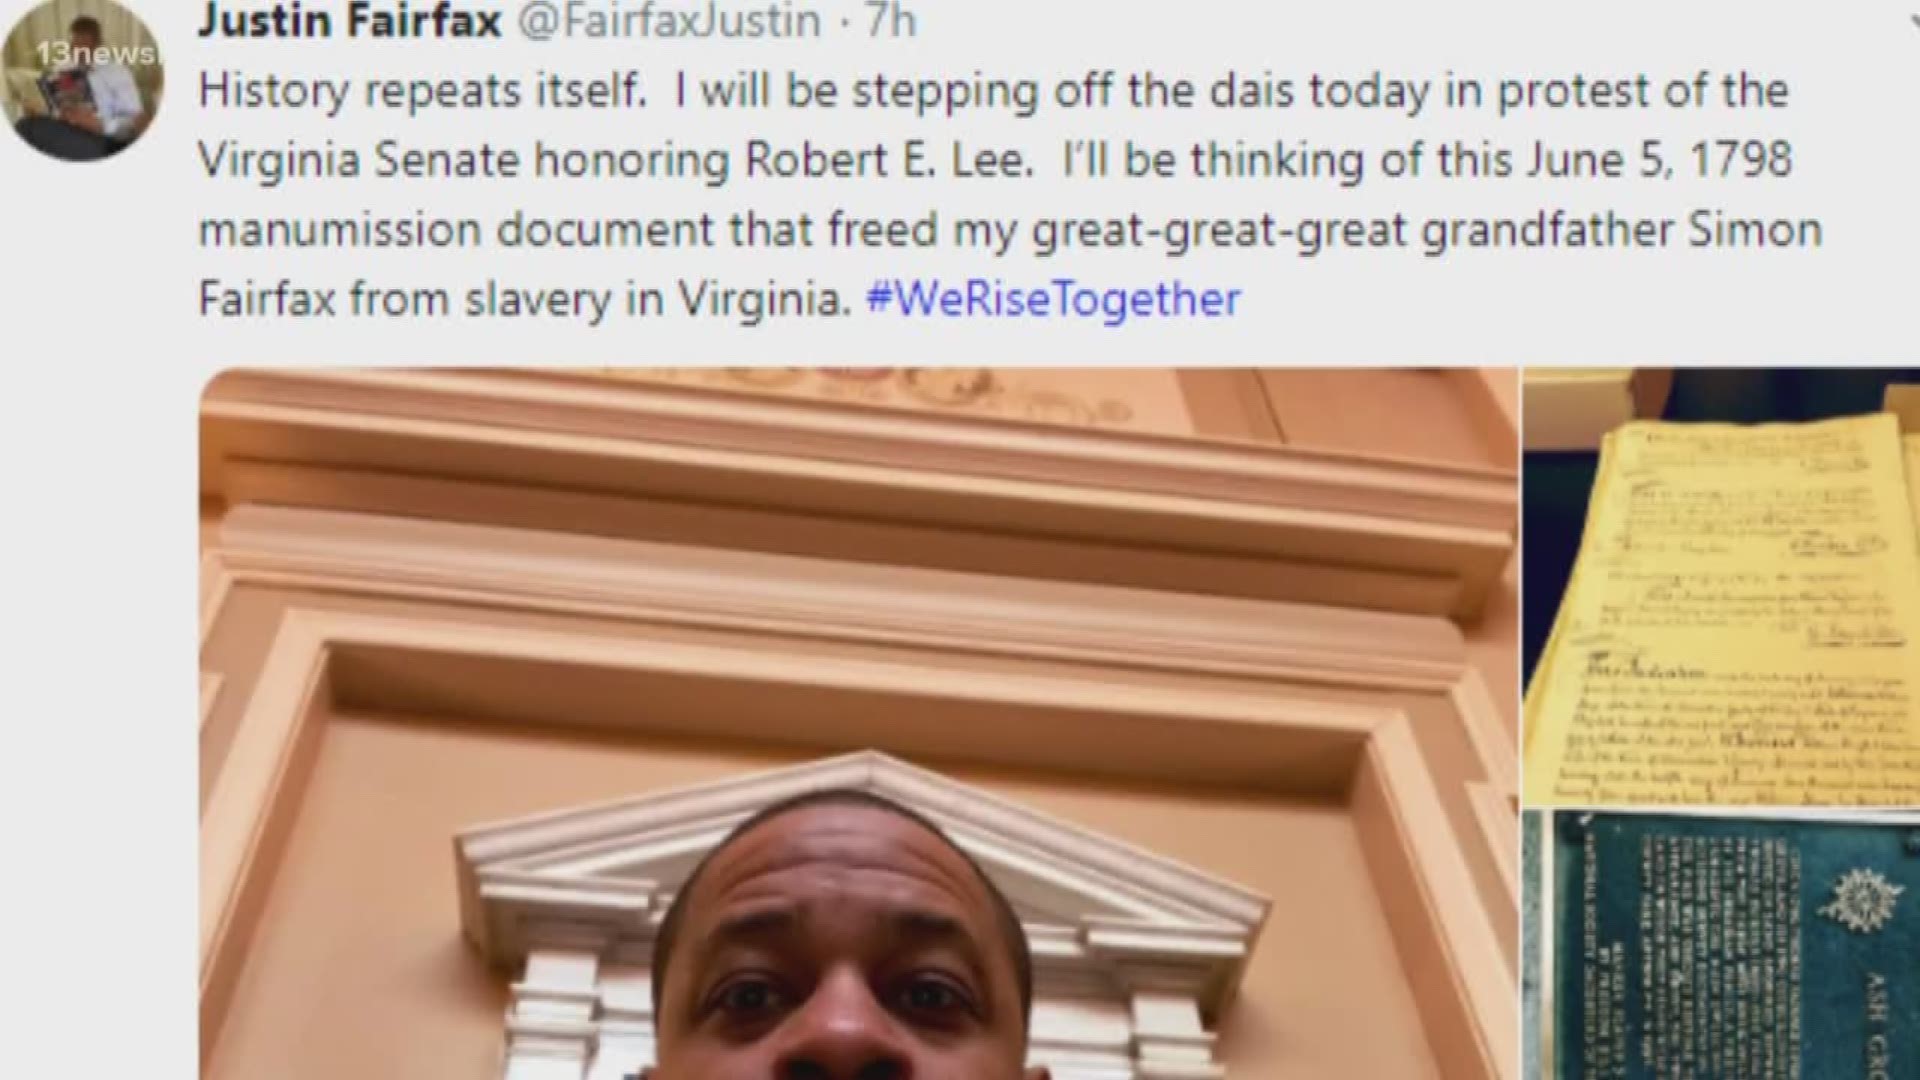 Virgnia's Leuitenant Governor Justin Fairfax is protesting Lee-Jackson Day.